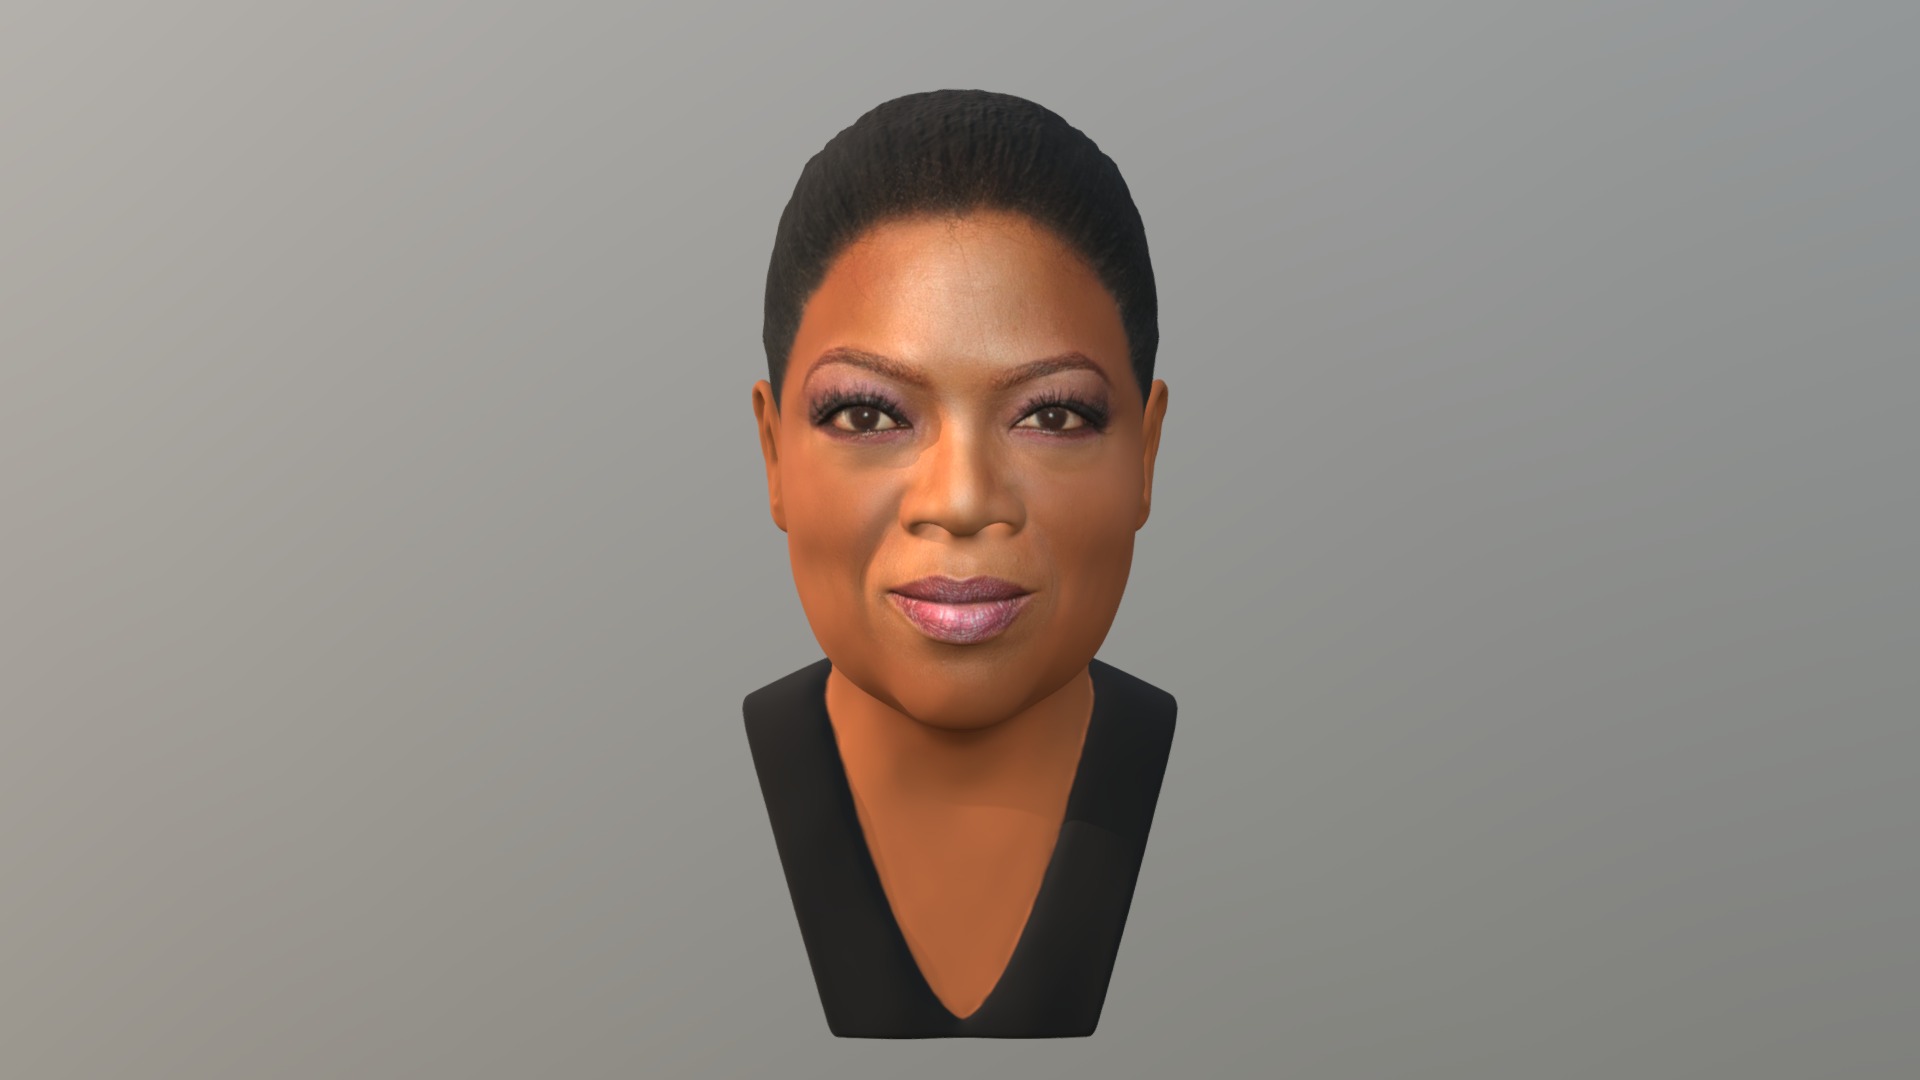 3D model Oprah Winfrey bust for full color 3D printing - This is a 3D model of the Oprah Winfrey bust for full color 3D printing. The 3D model is about a person with dark hair.